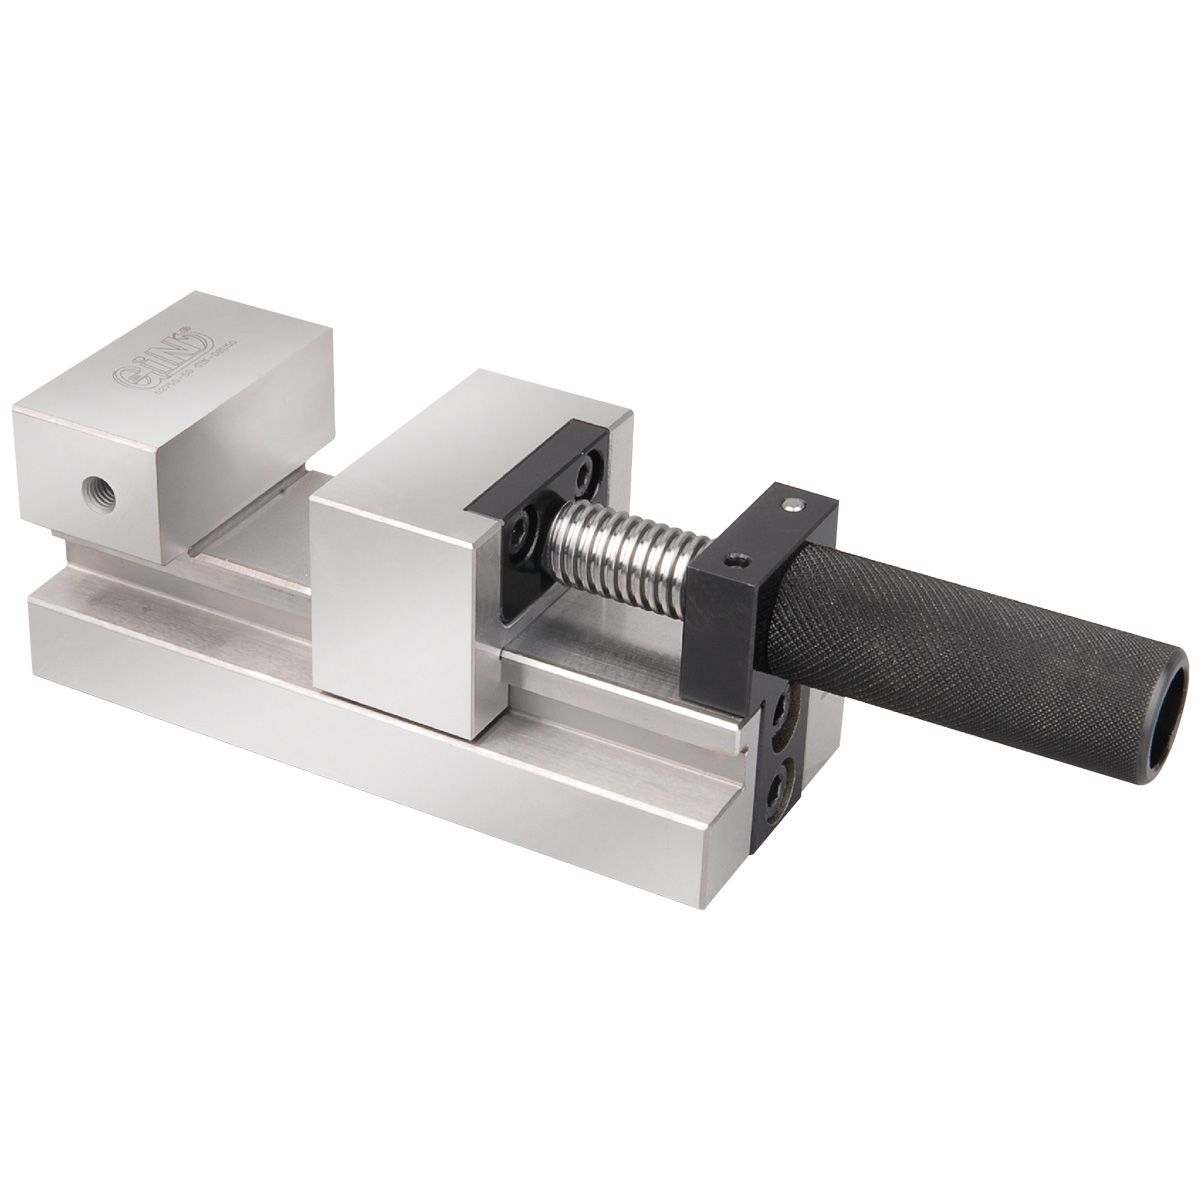 1-3/4" SCREW TIGHT STAINLESS STEEL VISE MADE IN TAIWAN (3900-2004)